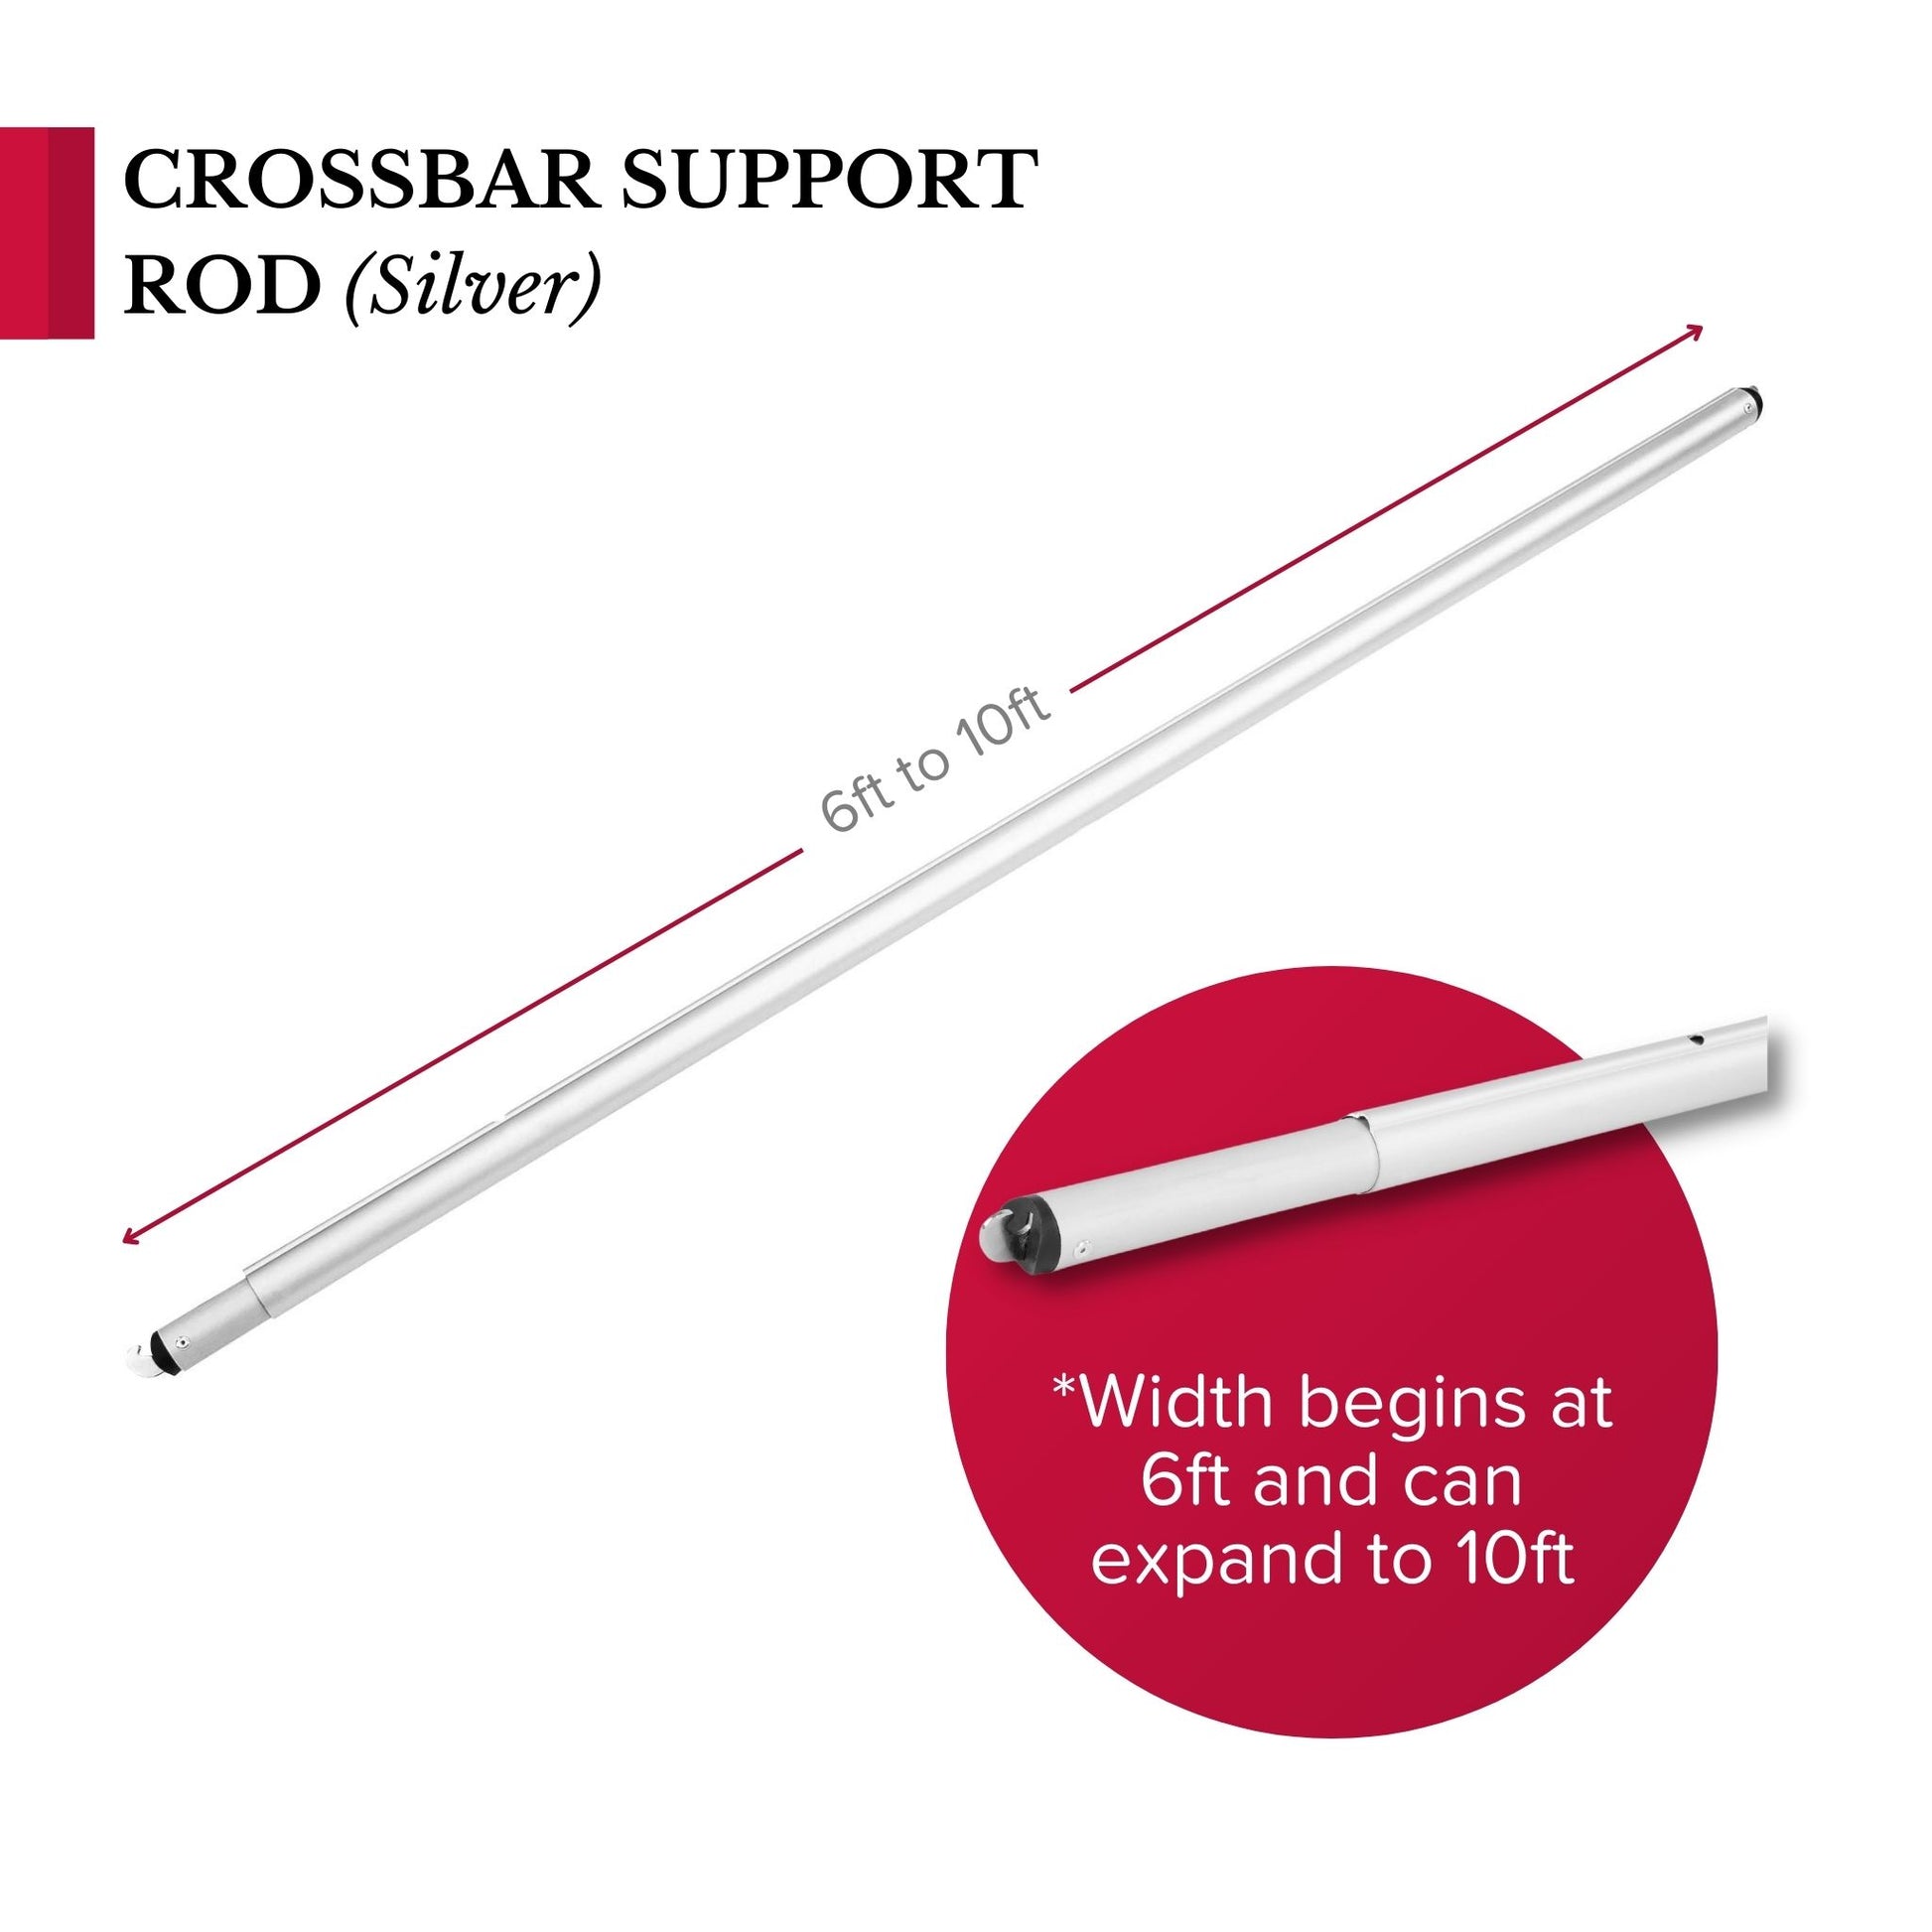 Crossbar support (drape support) rod 6ft to 10ft